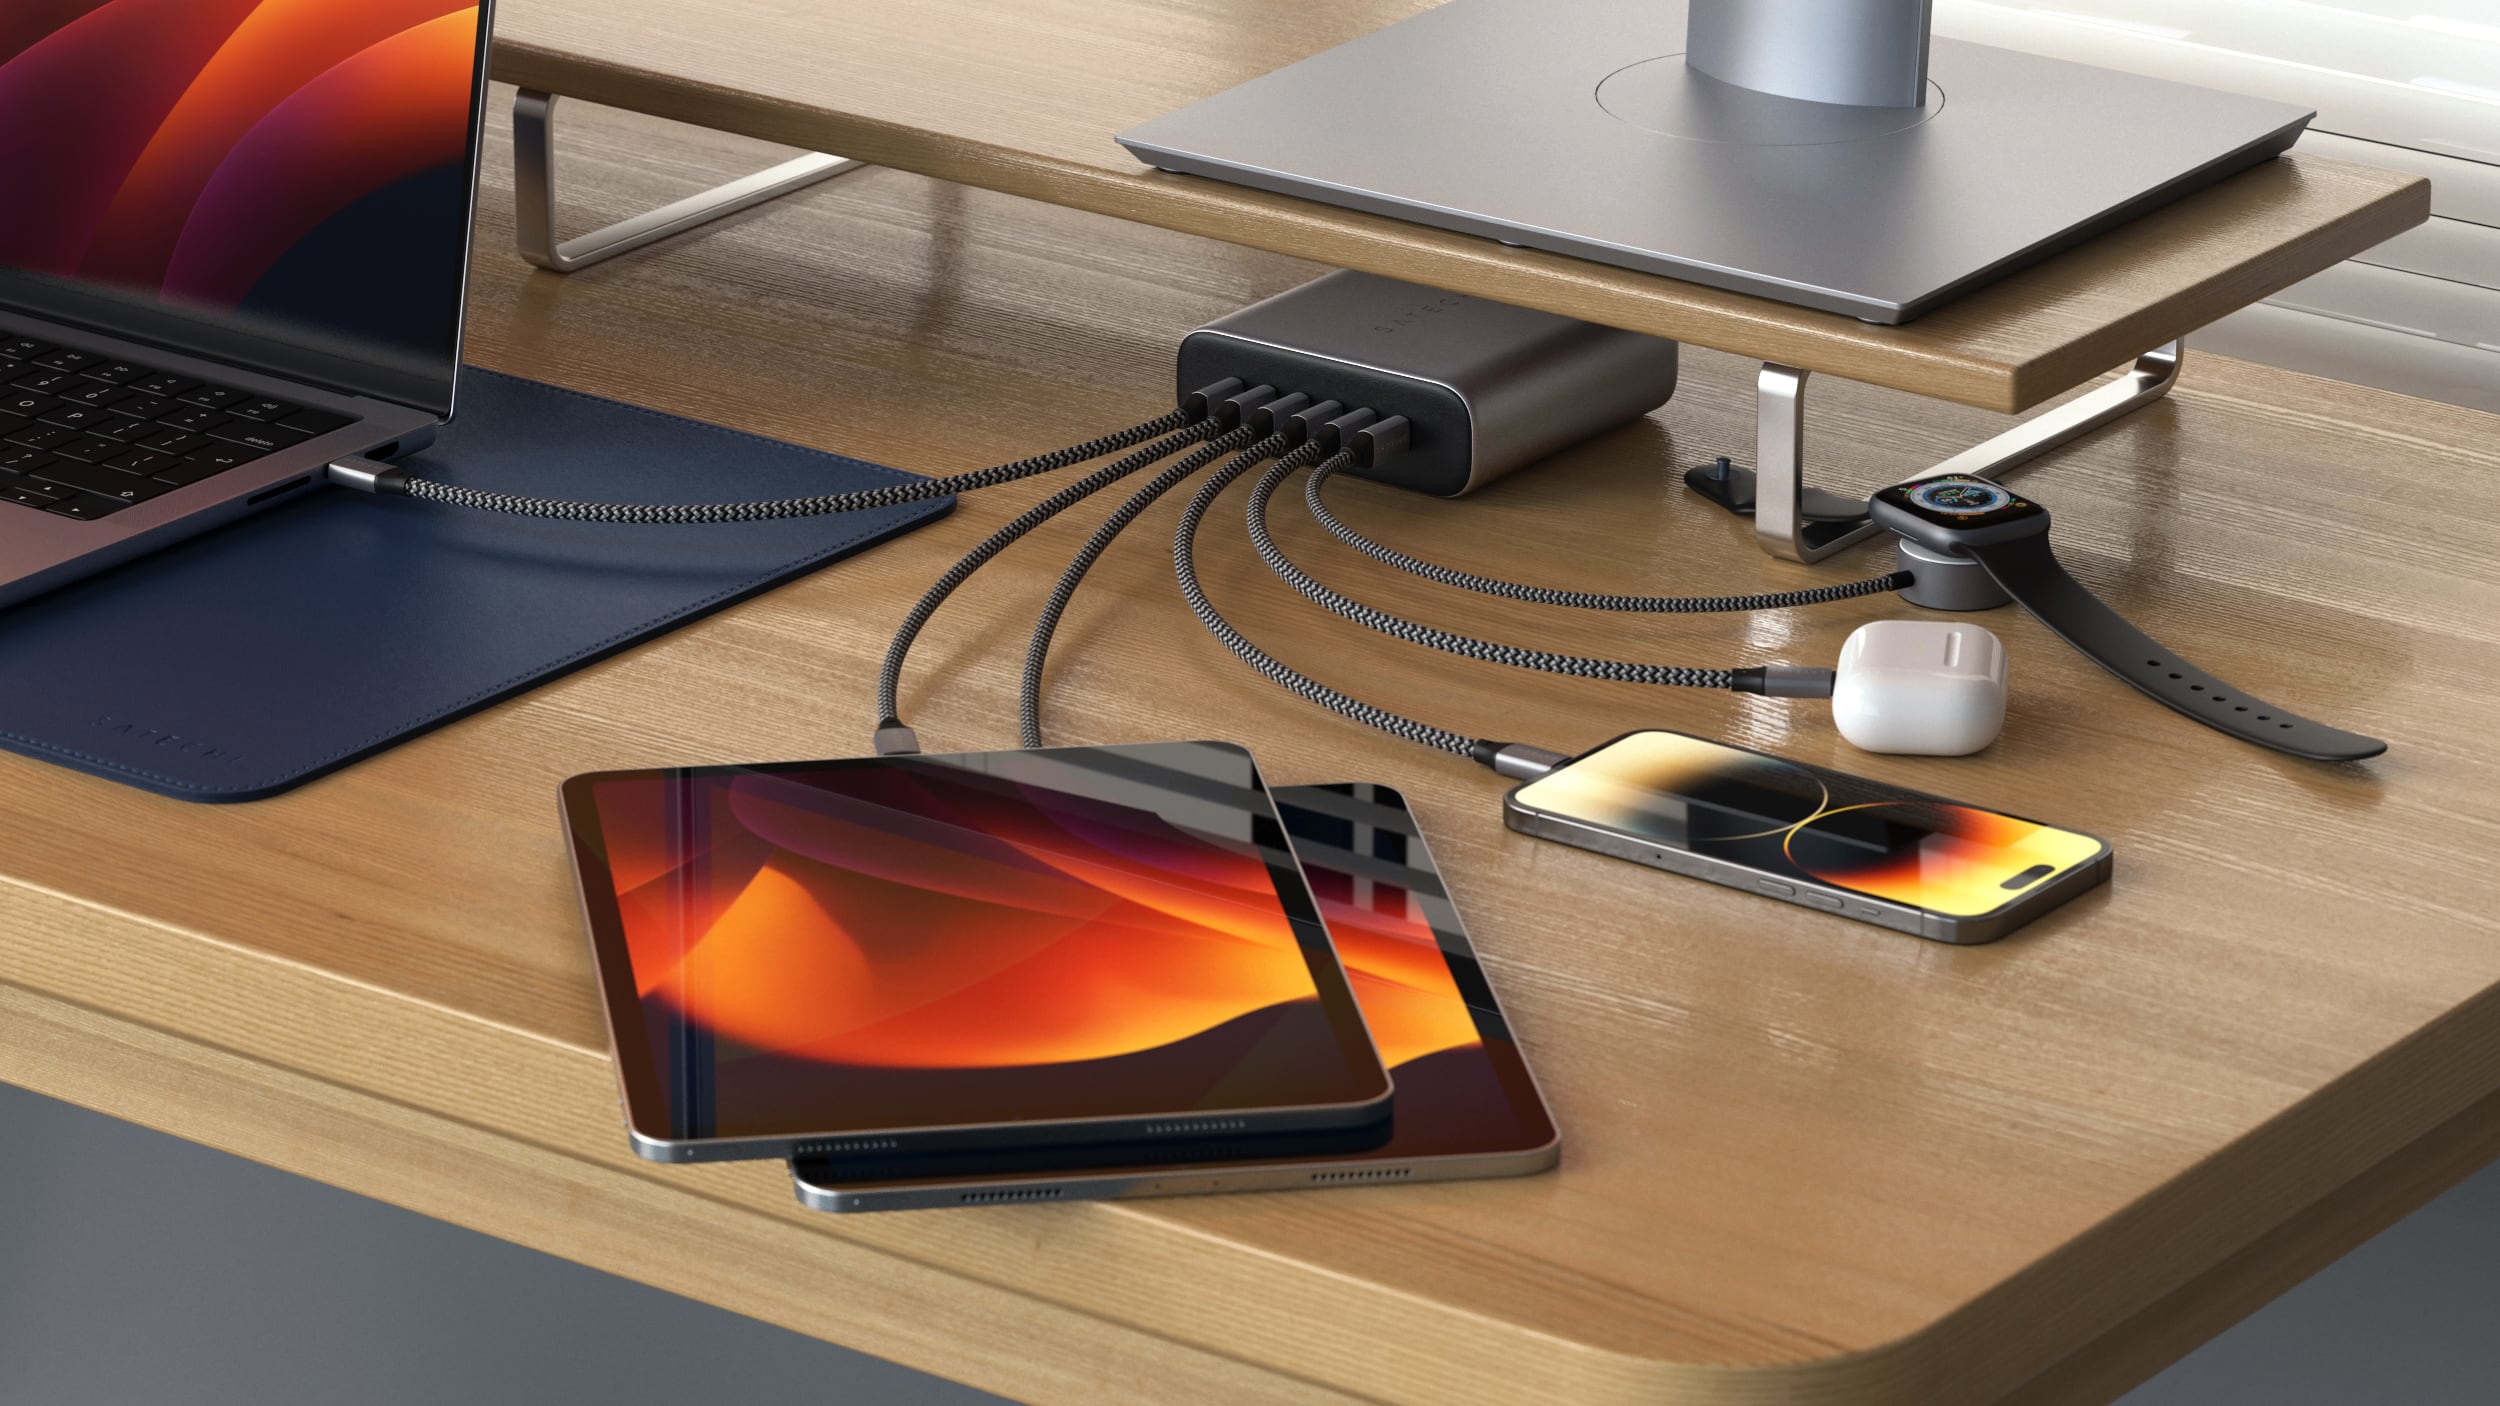 Satechi's multi-port 200W power adapter shown charging two iPads, two iPhones, a MacBook Pro, AirPods and an Apple Watch